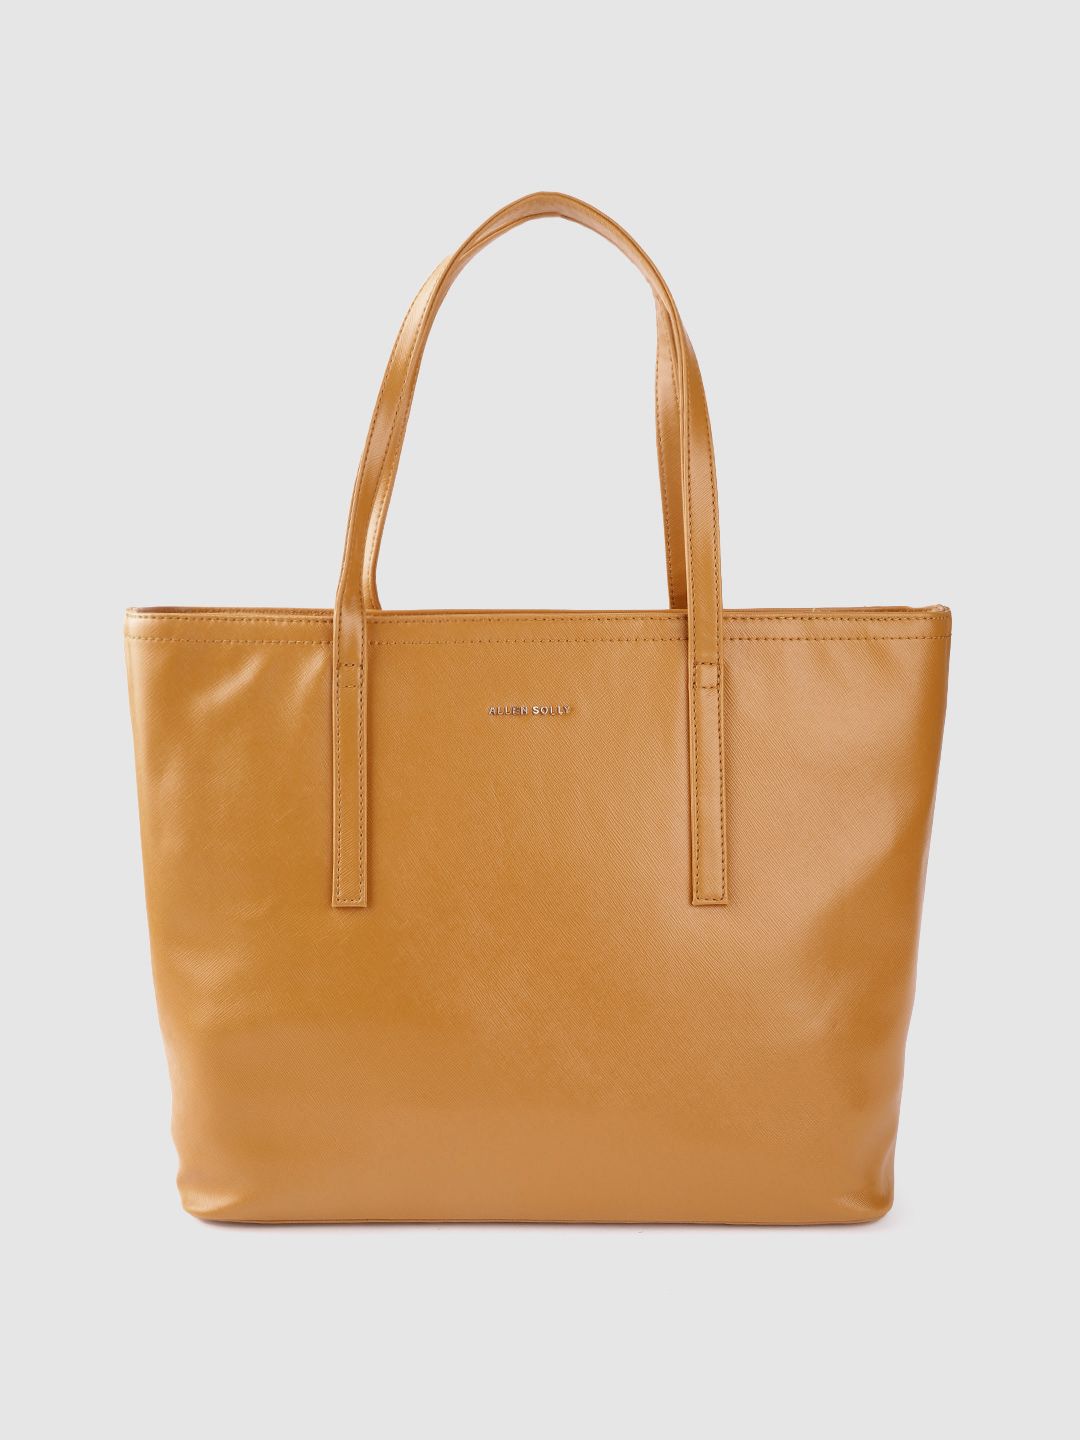 Allen Solly Tan Brown Solid Structured Shoulder Bag Price in India